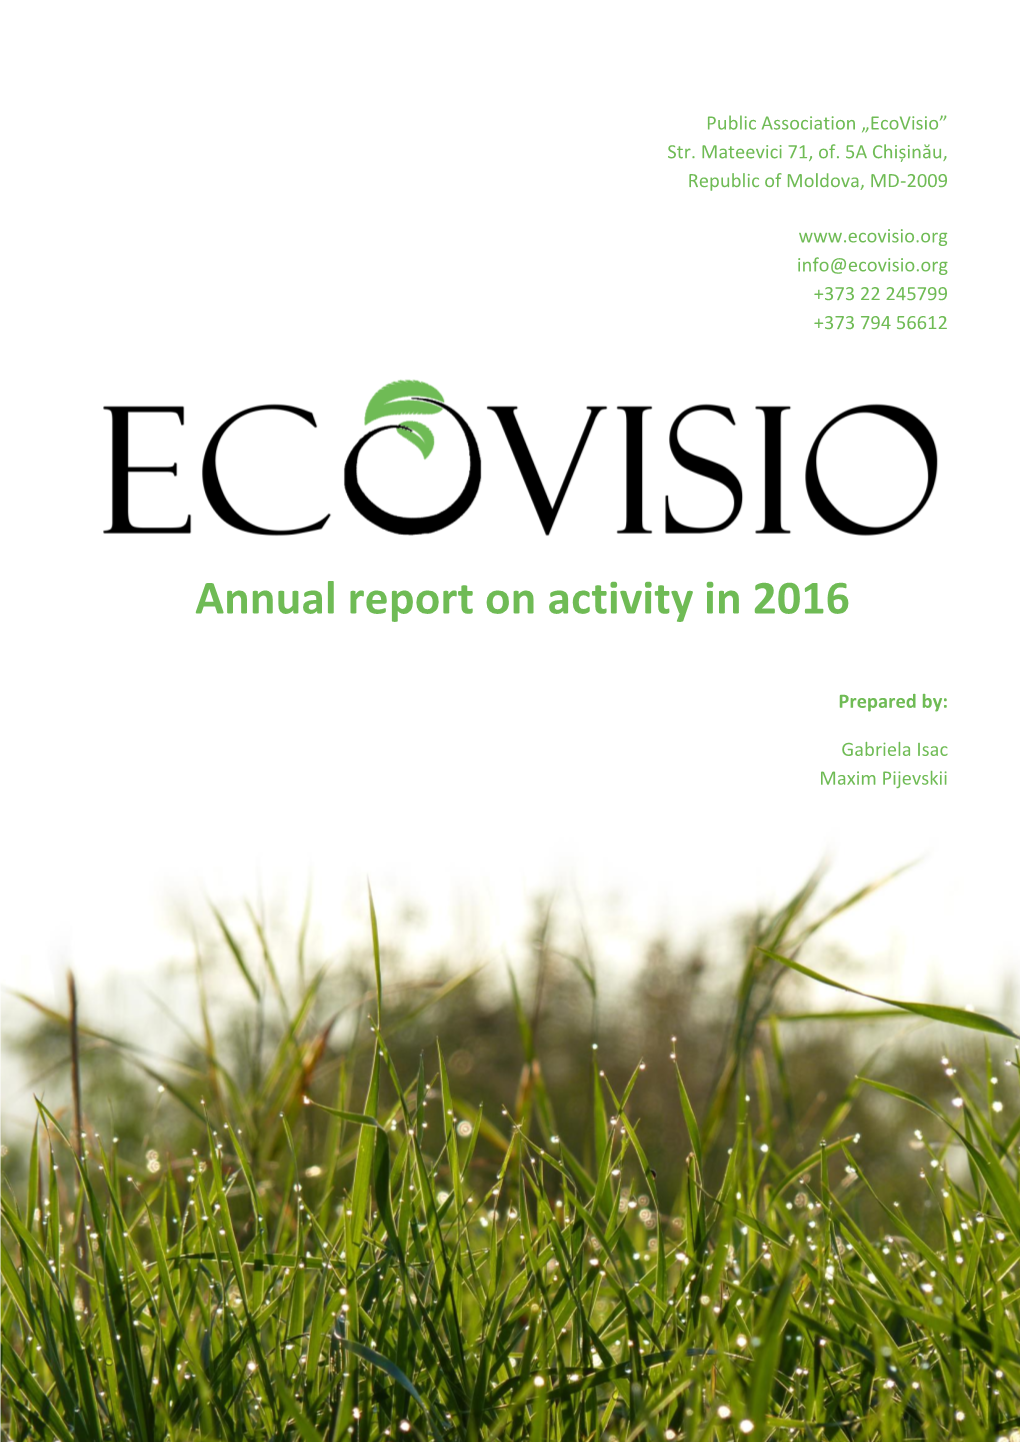 Annual Report on Activity in 2016